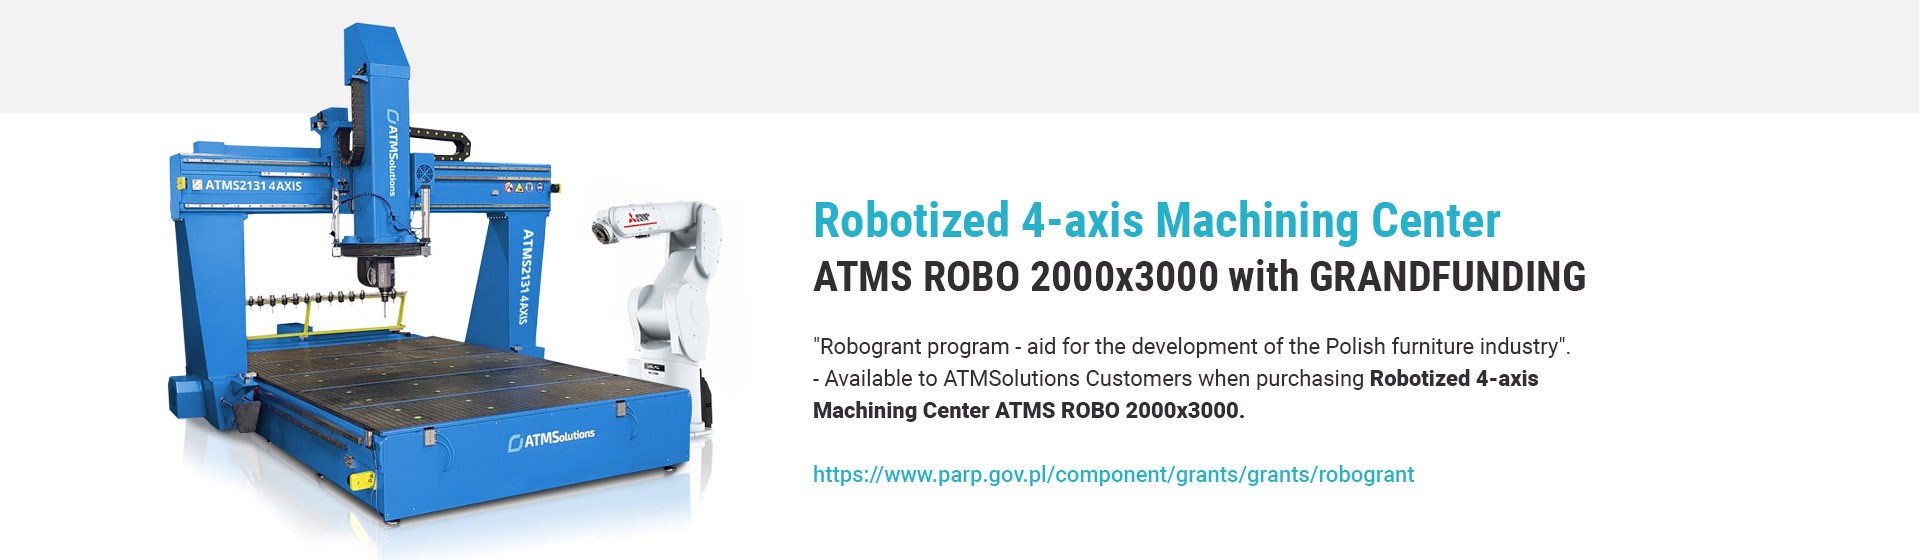 Robotized 4-axis Machining Center ATMS ROBO 2000x3000 with GRANDFUNDING